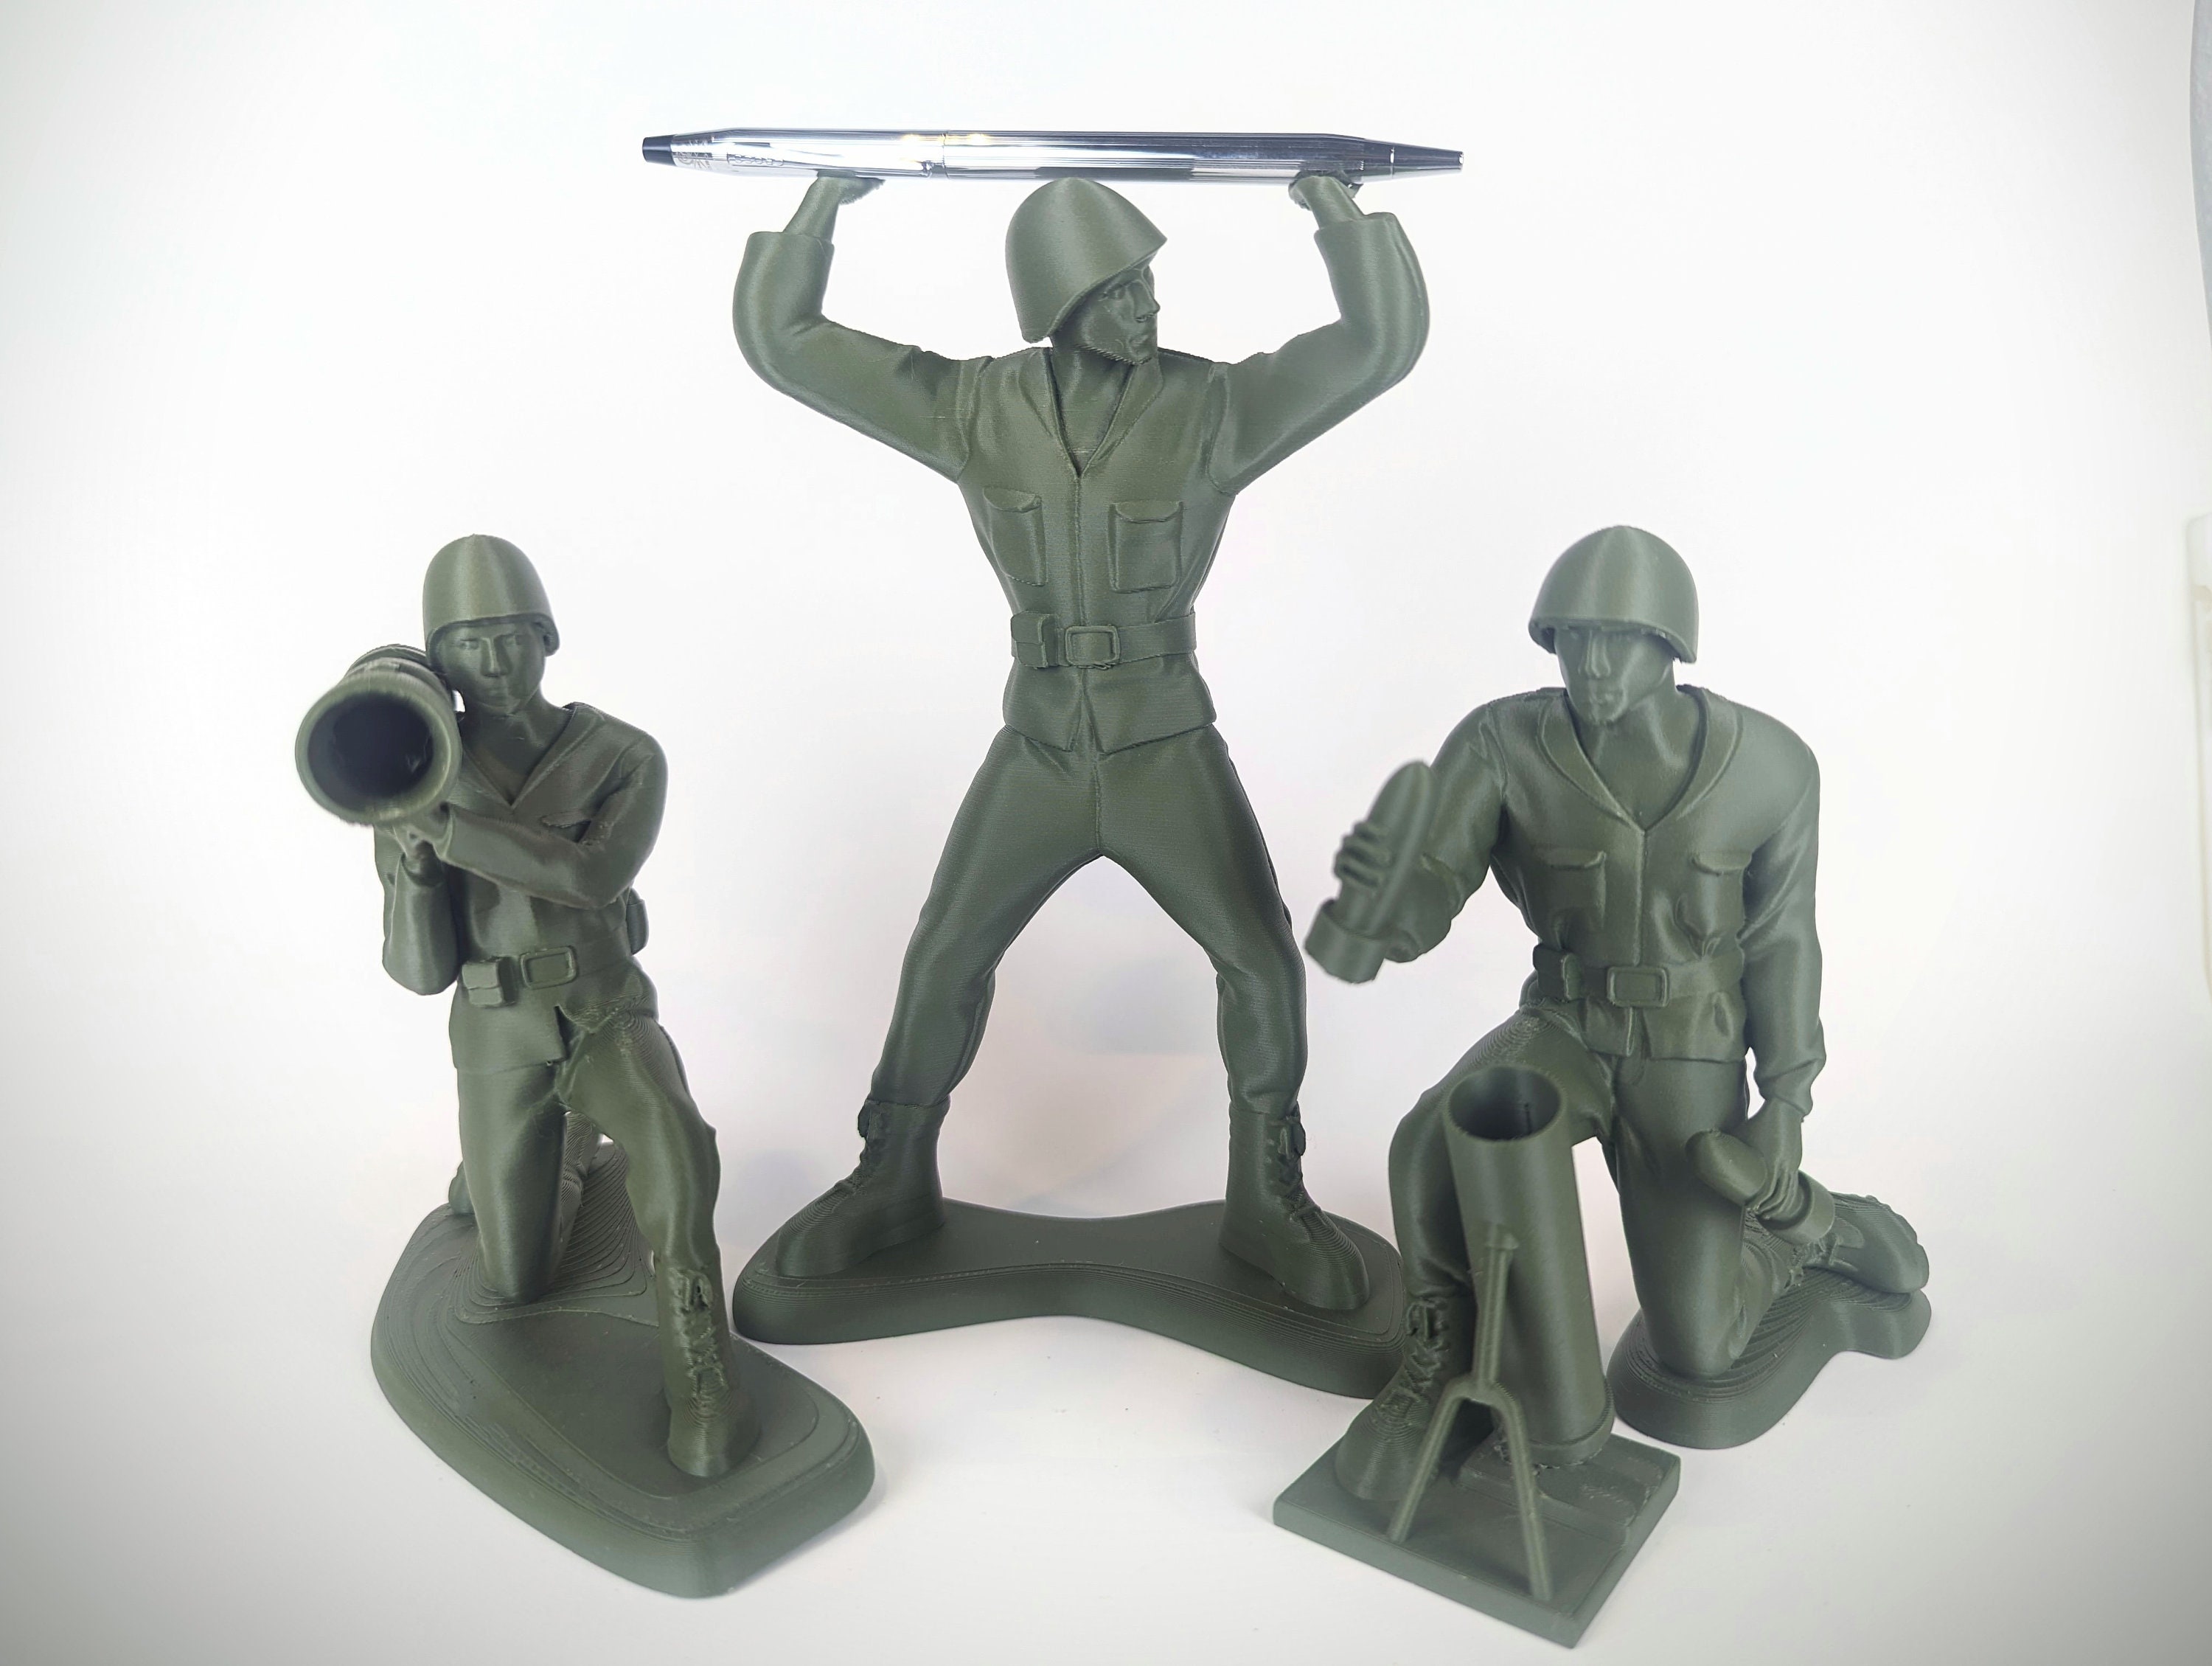 Michigan Toy Soldier Company : Monument Hobbies - Monument Hobbies - Flush  Cut Hobby Clippers